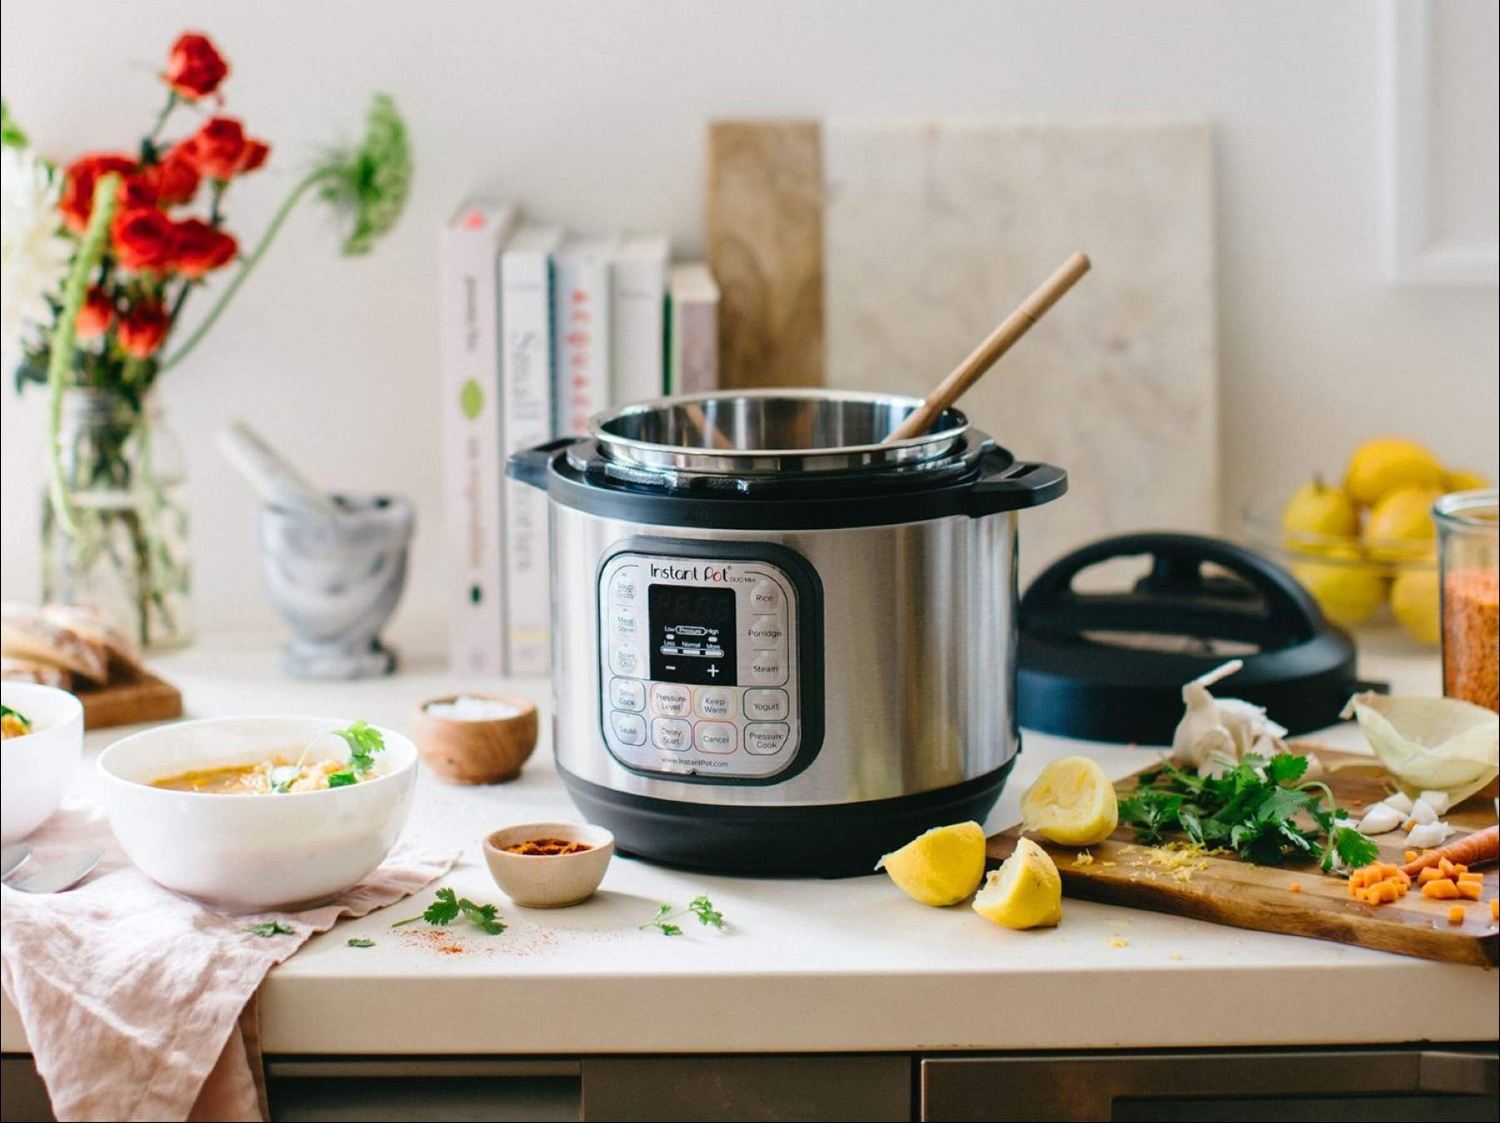 Walmart just slashed the price on this 10-piece cookware set from